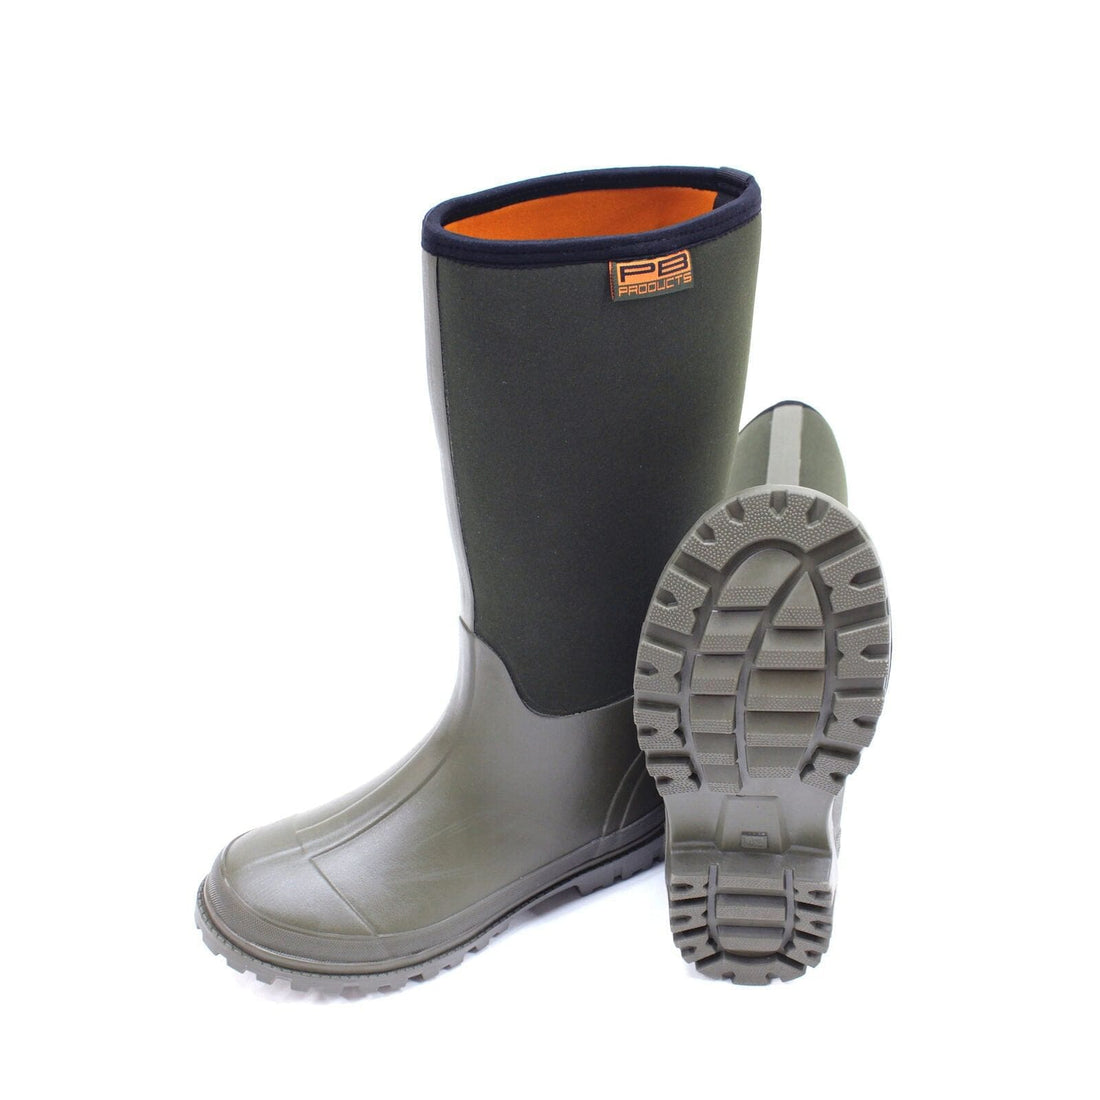 PB Products Neoprene Boots 6mm 44